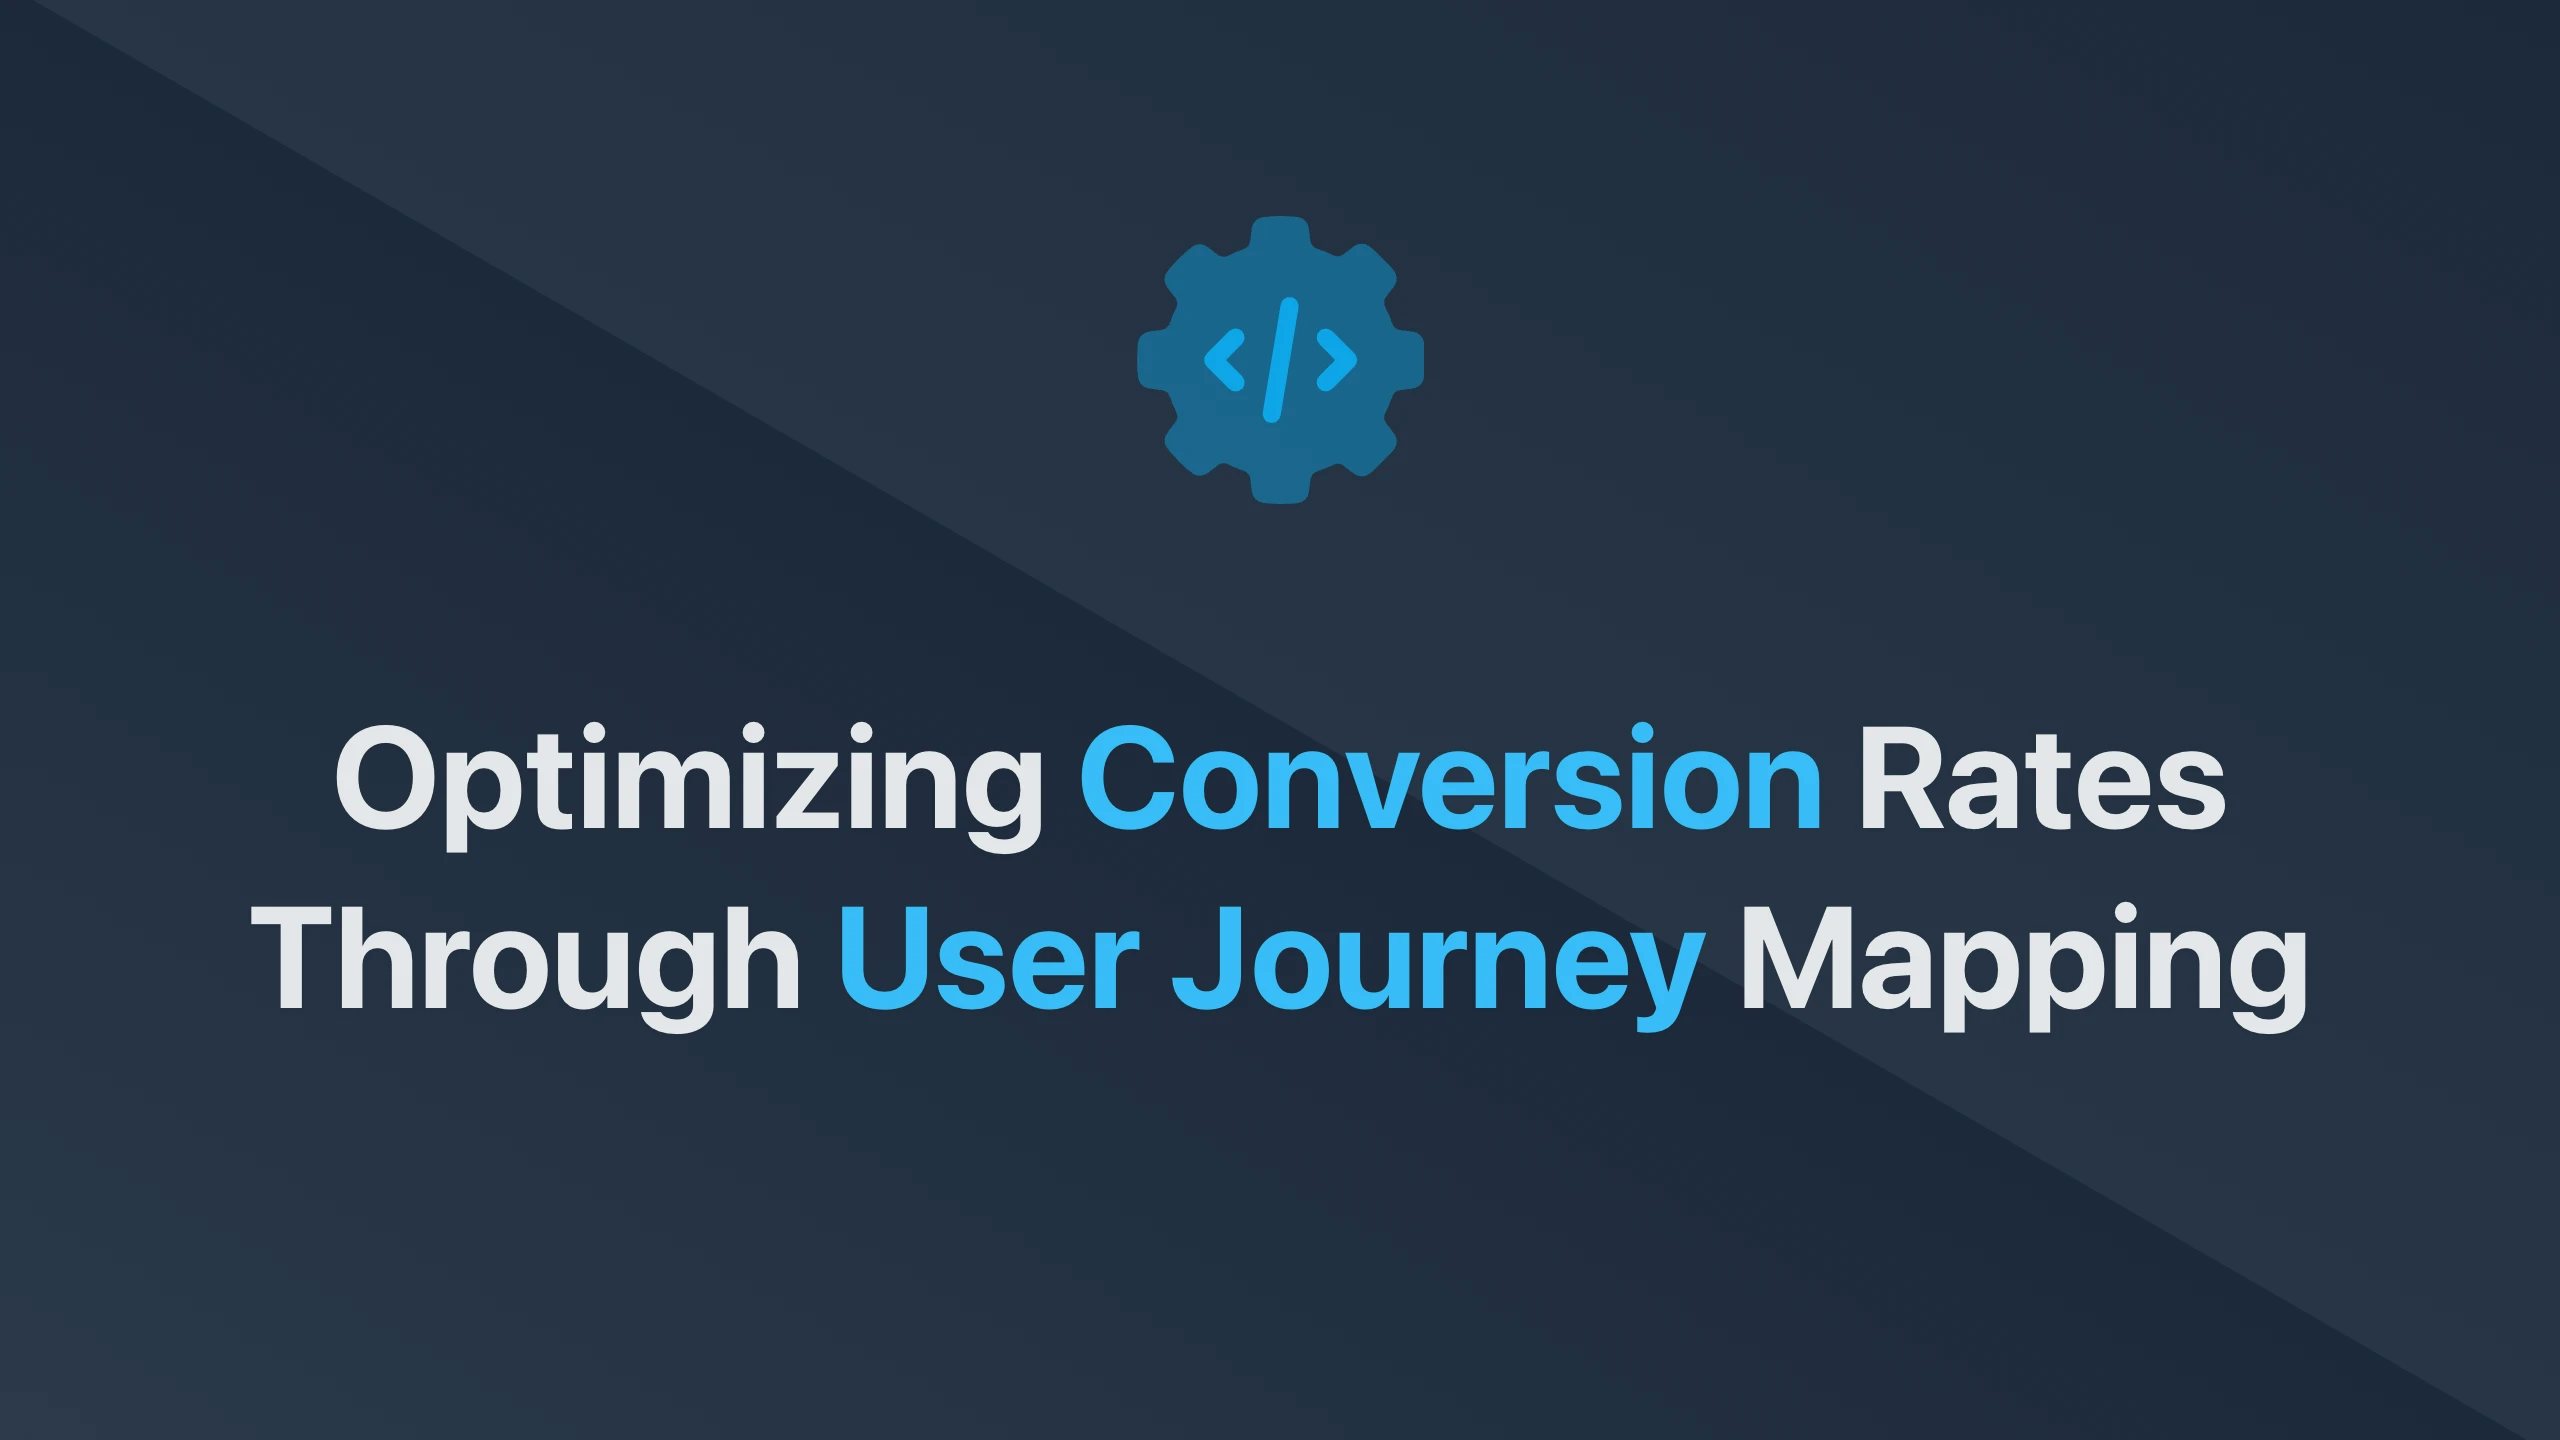 Cover Image for Optimizing Conversion Rates Through User Journey Mapping